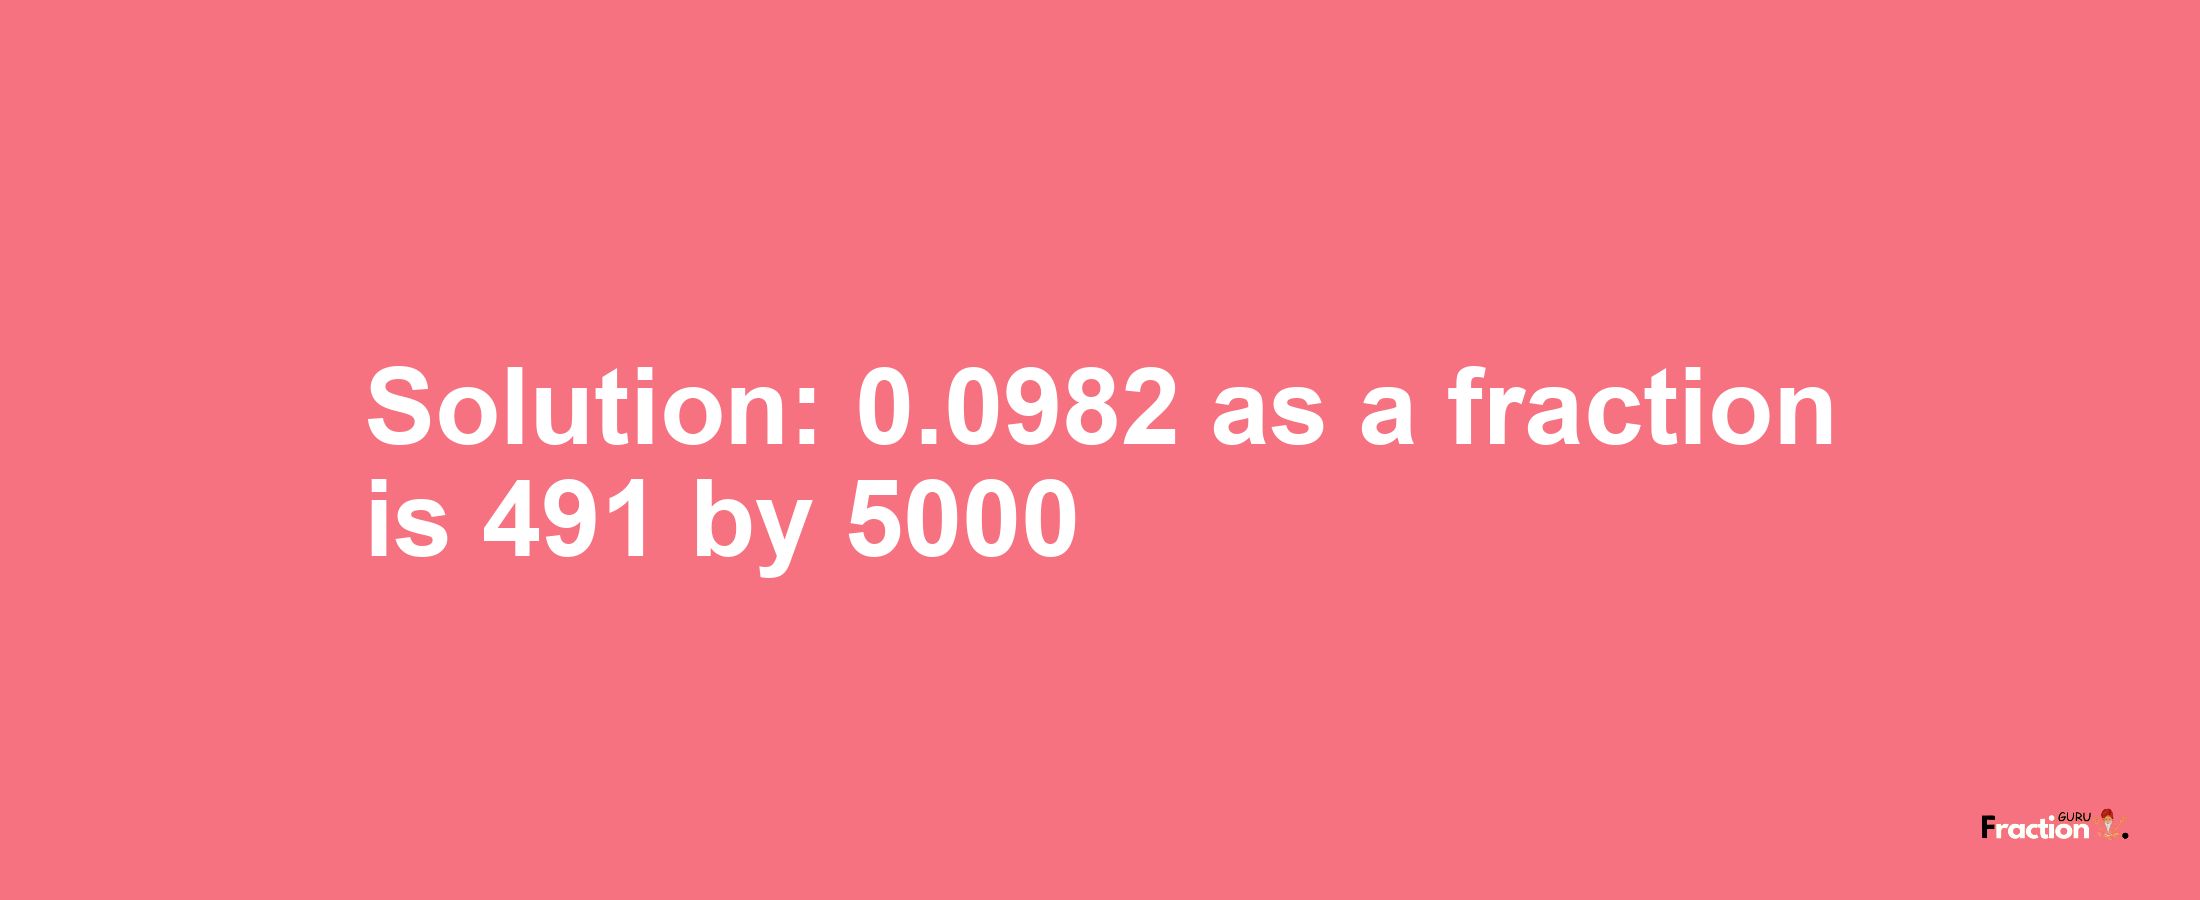 Solution:0.0982 as a fraction is 491/5000